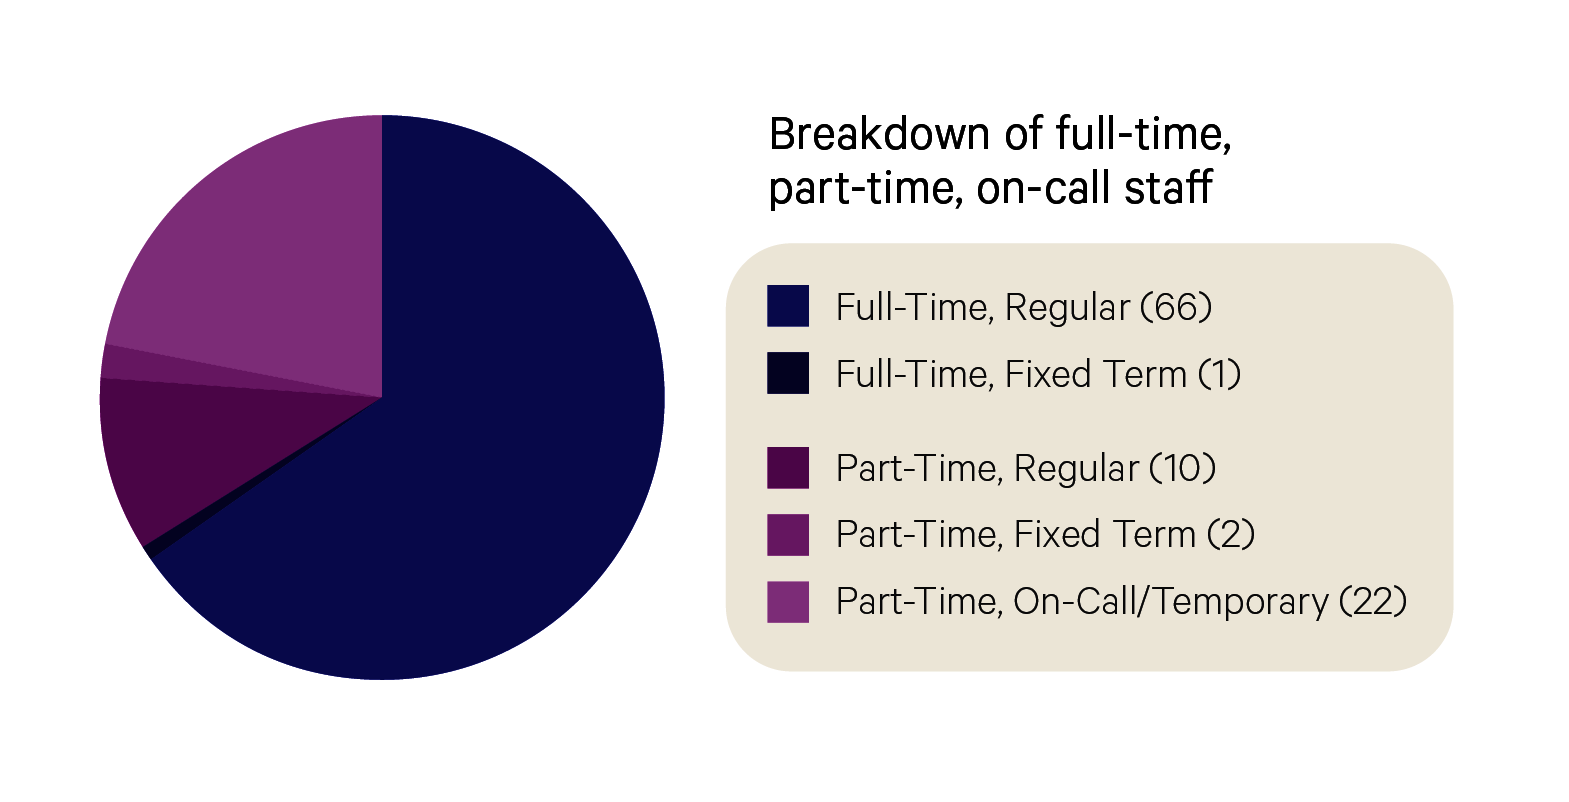 A pie chart titled “Breakdown of full-time, part-time, on-call staff” with a large section of indigo, smaller sections of purple and pink, and even smaller sections of dark purple and magenta. Its label reads “Full time, regular (66), full time, fixed term (1), part time, regular (10), part time, fixed term (2), part time, on-call / temporary (22)”. 